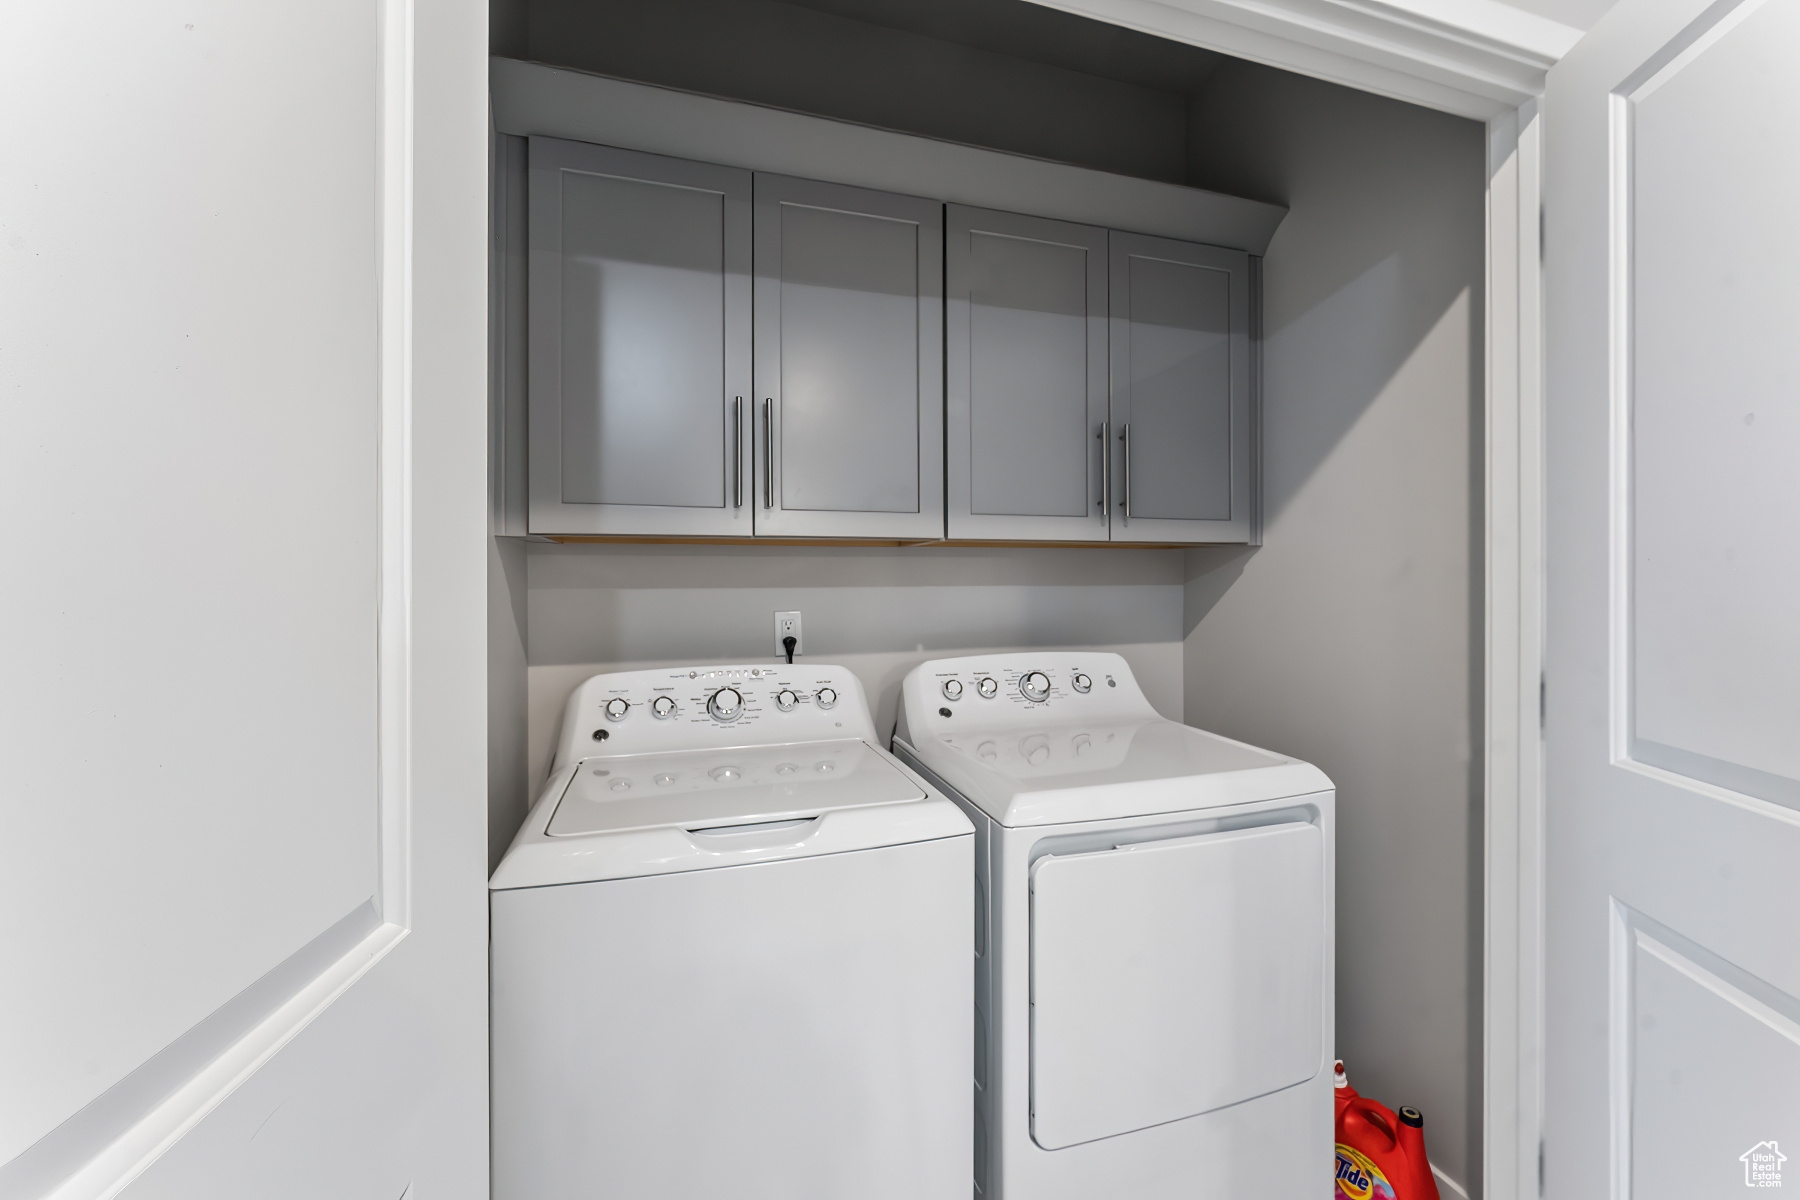 Clothes washing area with cabinets and washer and dryer